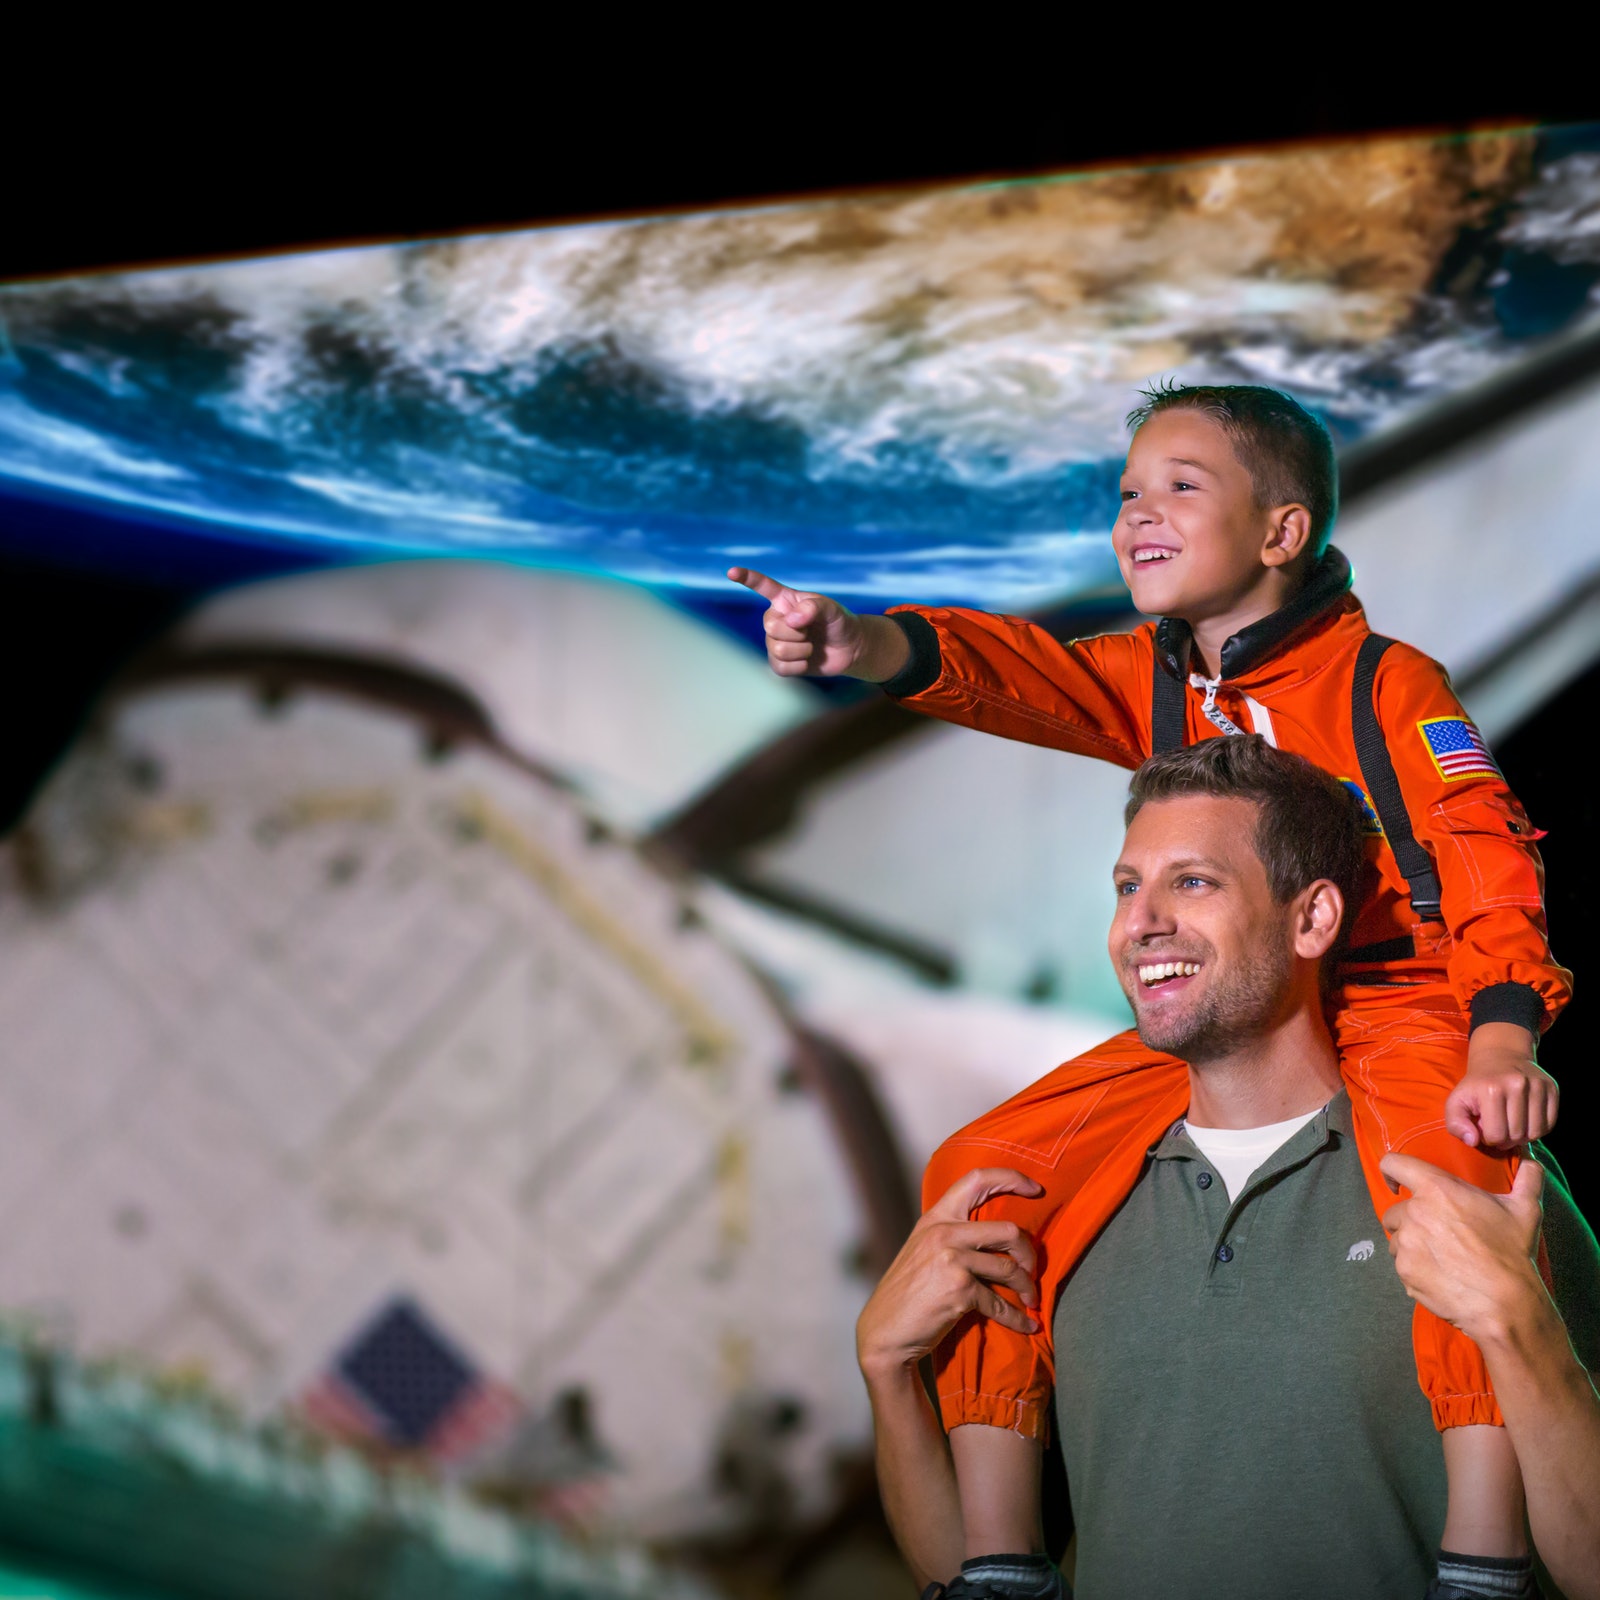 Astronaut Training Experience in United States